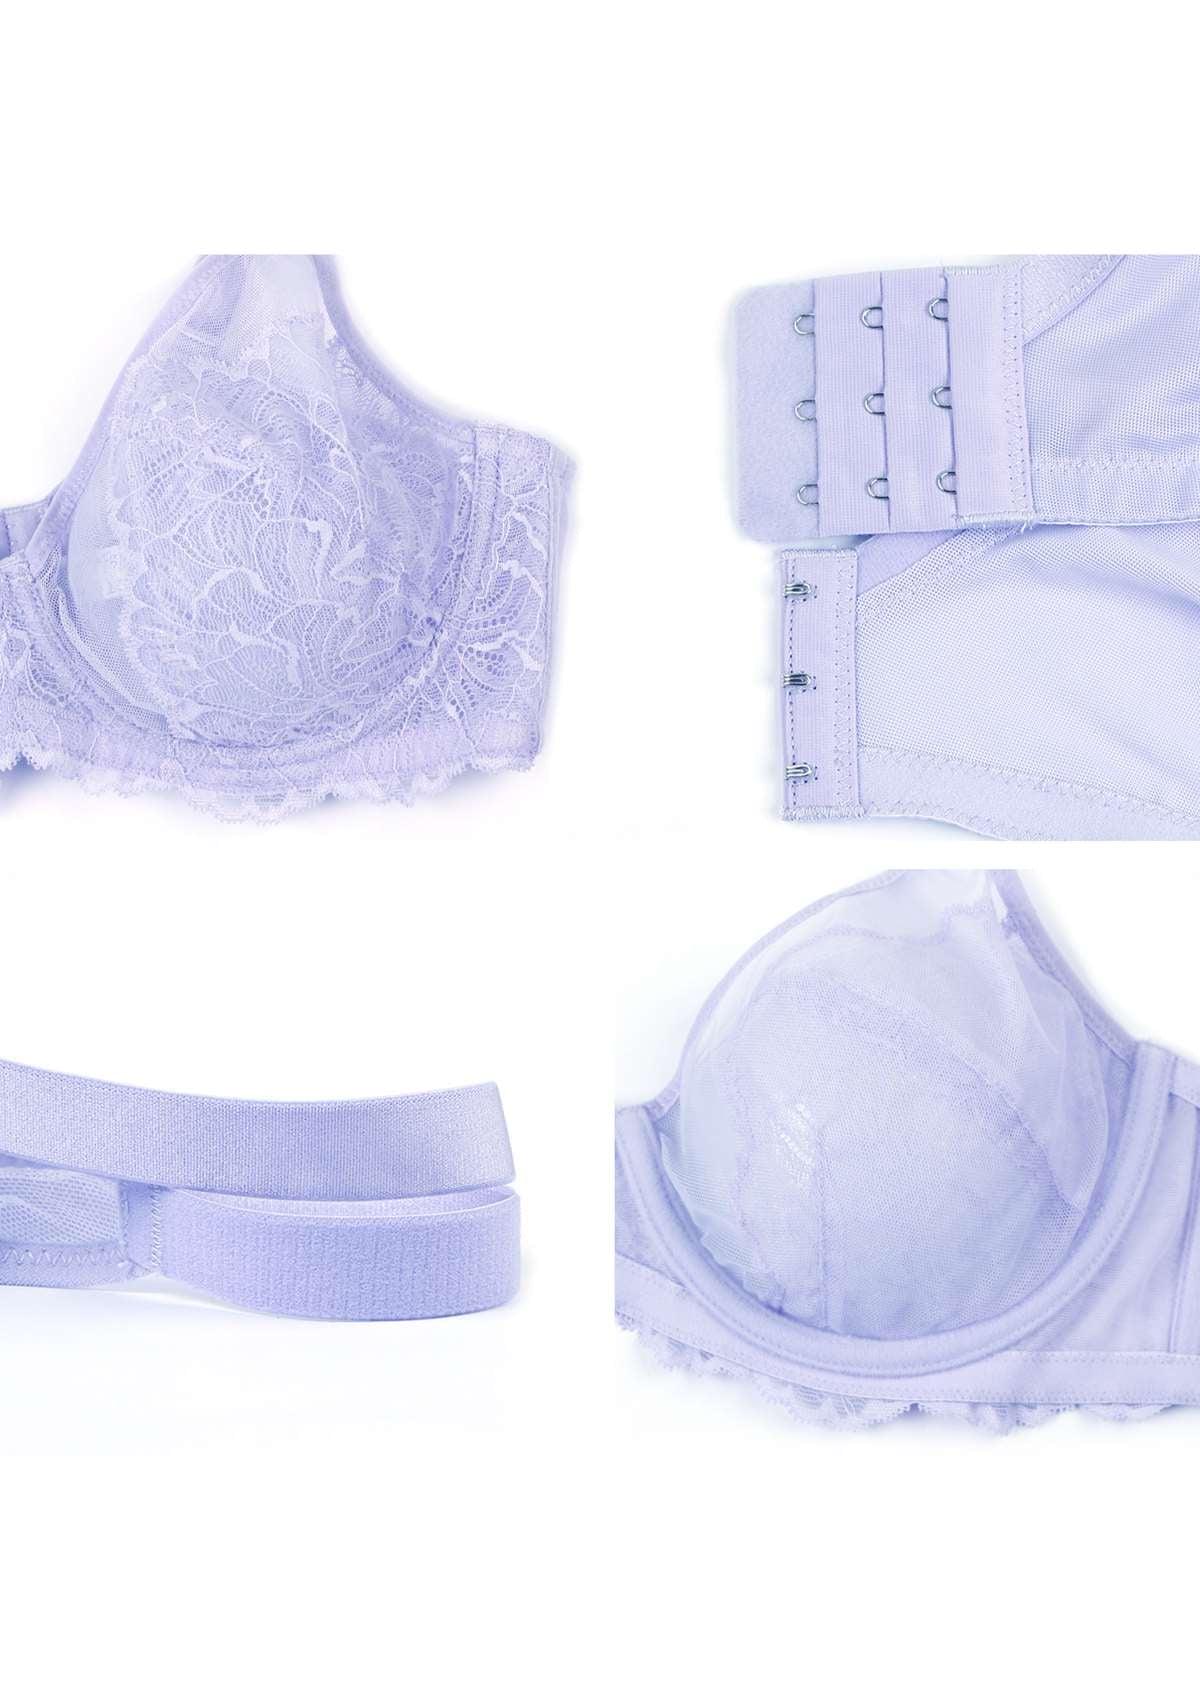 HSIA Blossom Transparent Lace Bra: Plus Size Wired Back Smoothing Bra - Light Purple / 40 / G